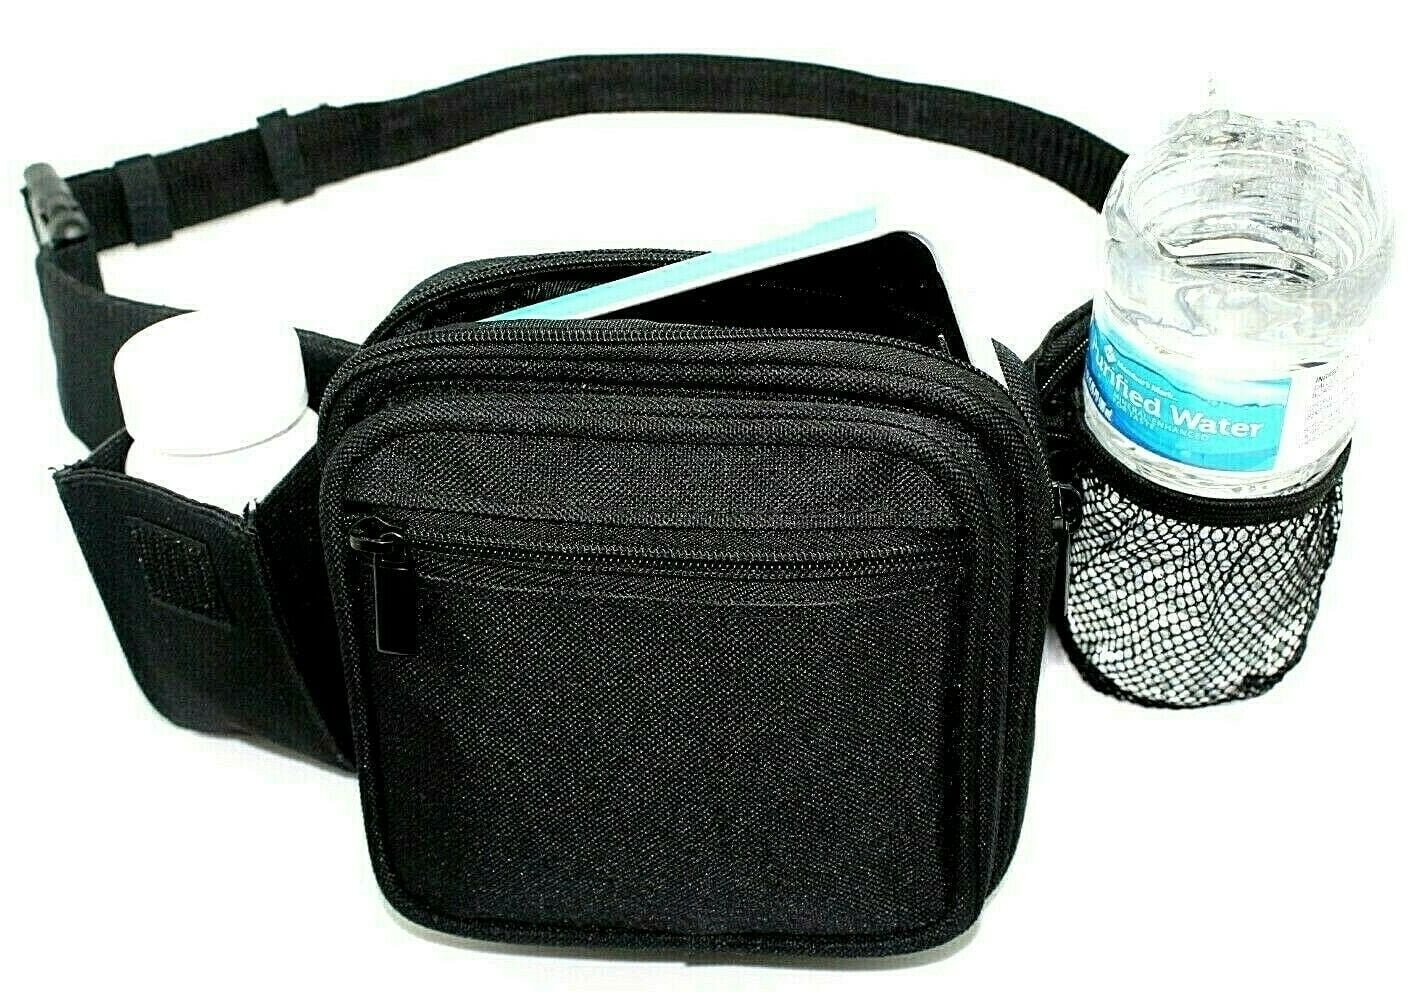 Waterfly Fanny Pack Waist Bag: 3.5L Waist Bag with One Water Bottle Holder for Man Woman Travelling Hiking Walking, Adult Unisex, Size: Large, Gray